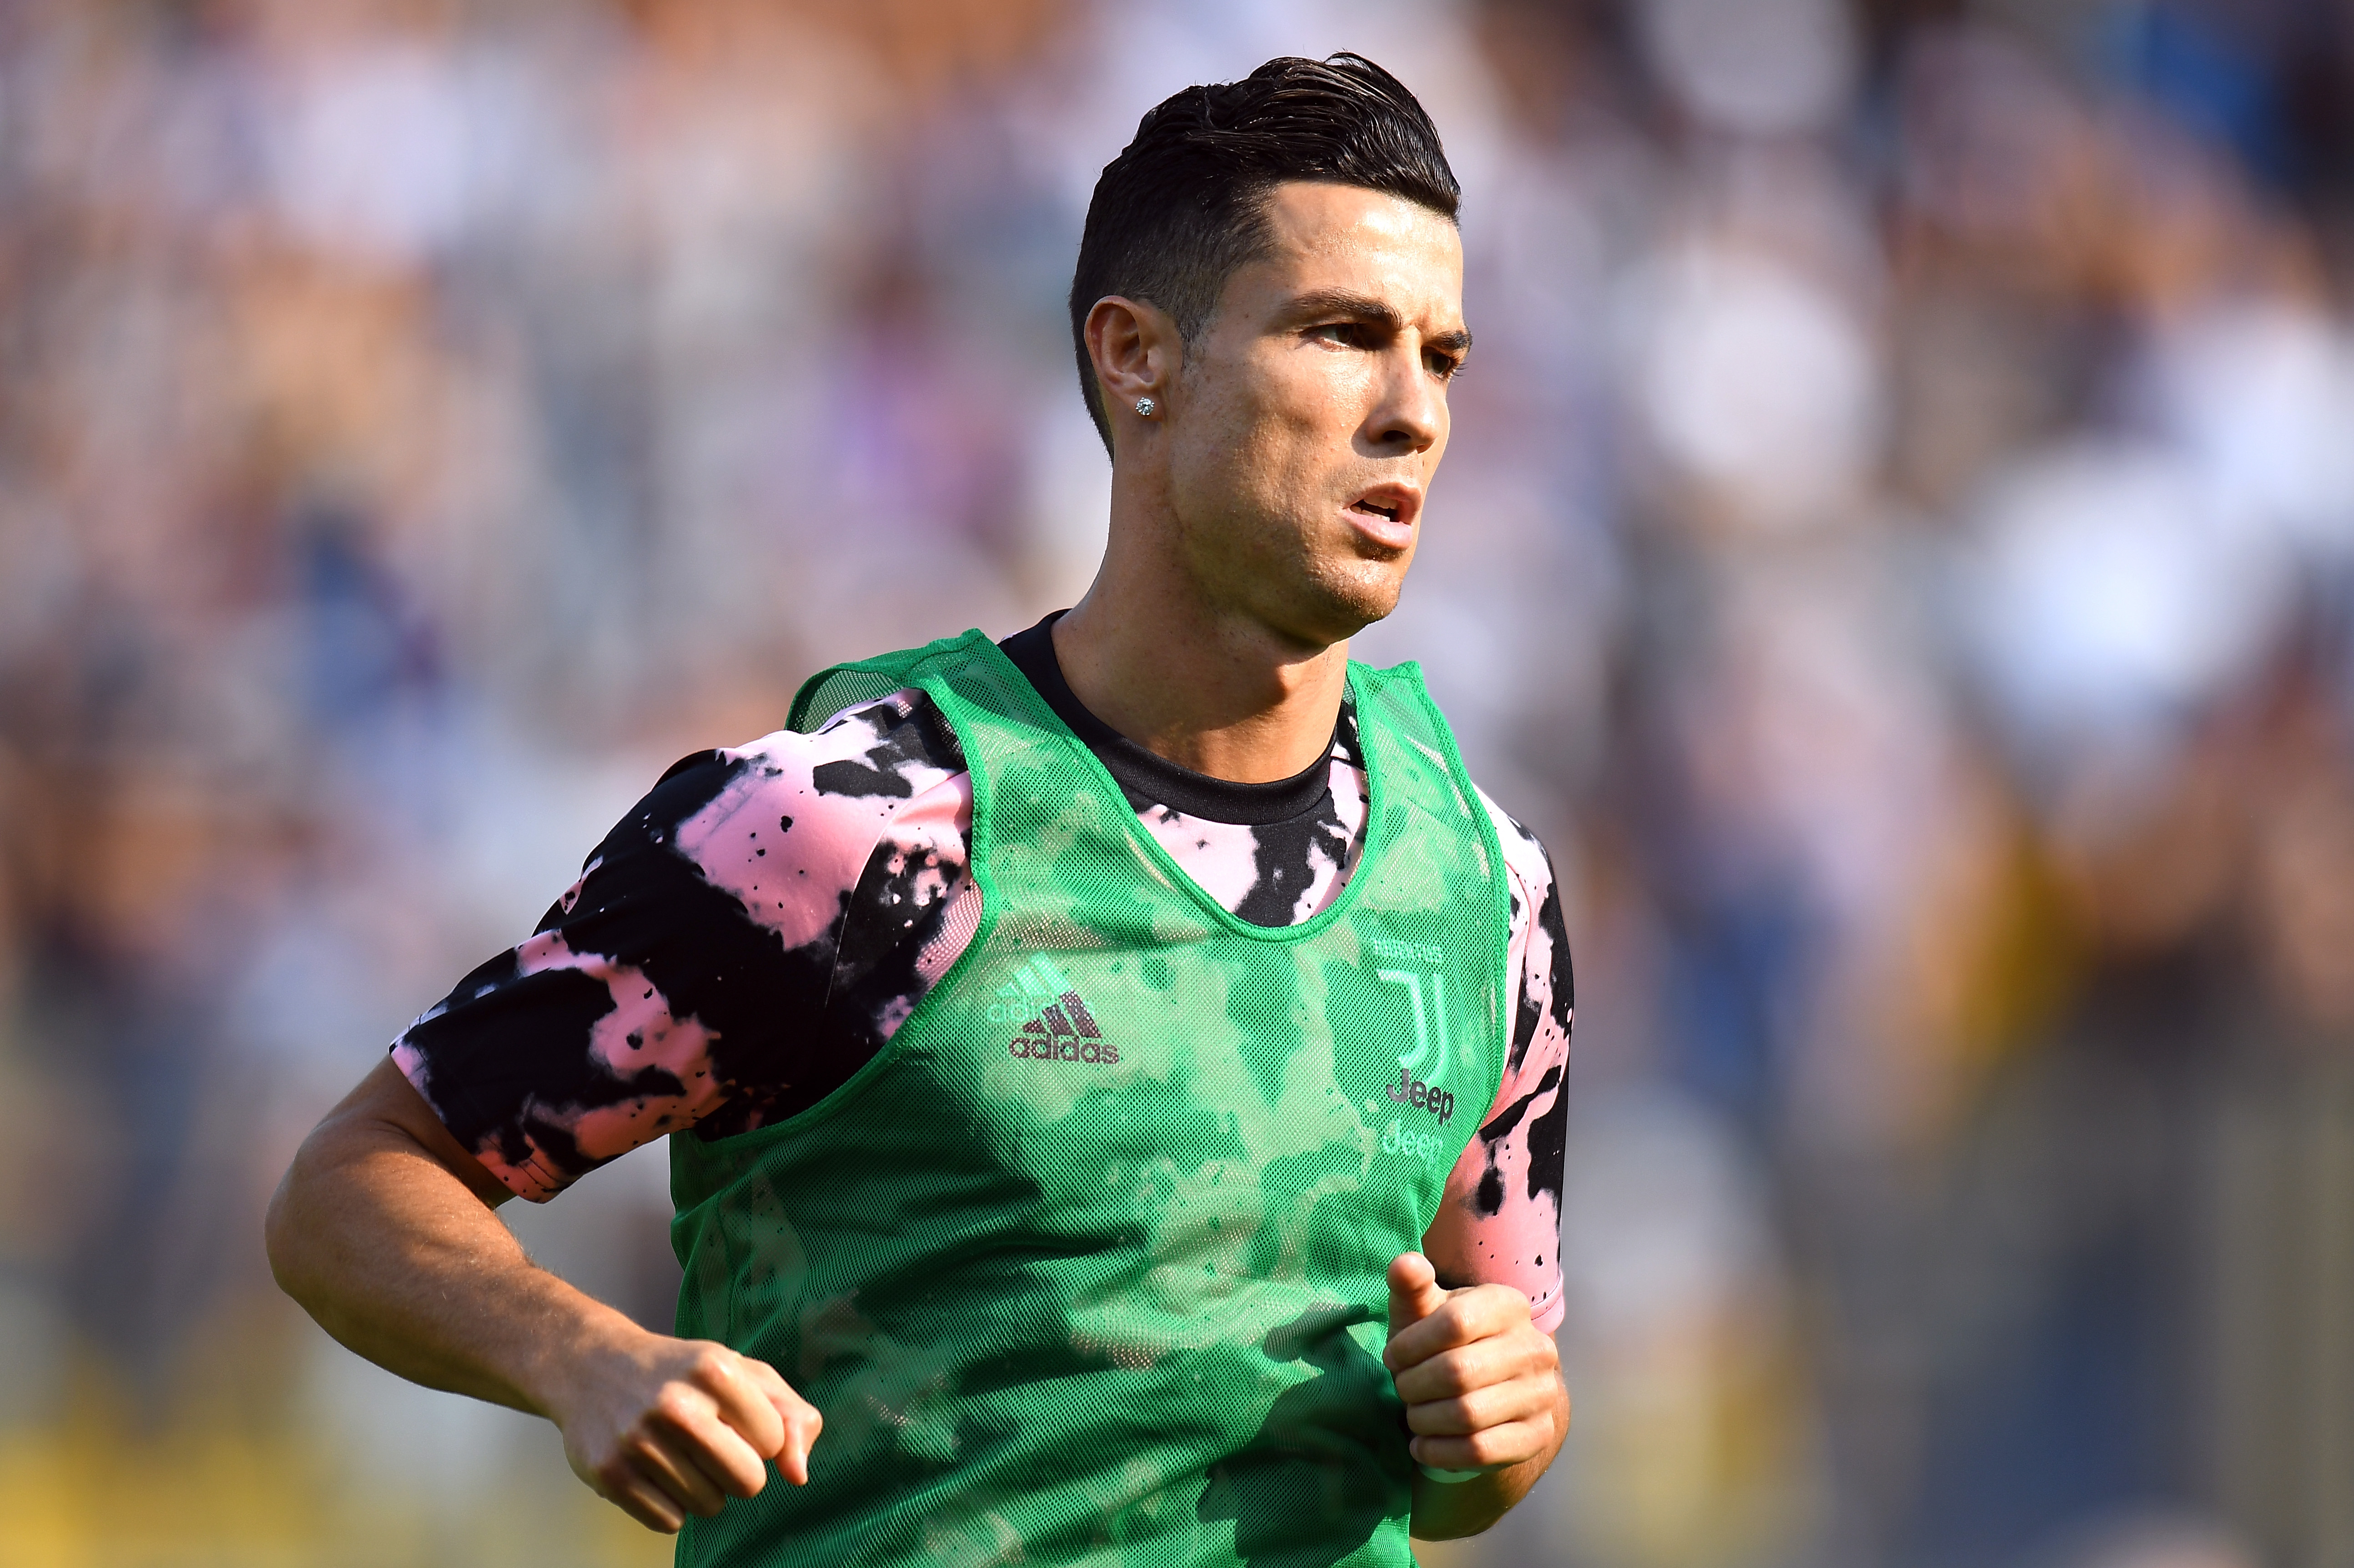 Will Ronaldo move to Chelsea? (Photo by Alessandro Sabattini/Getty Images)